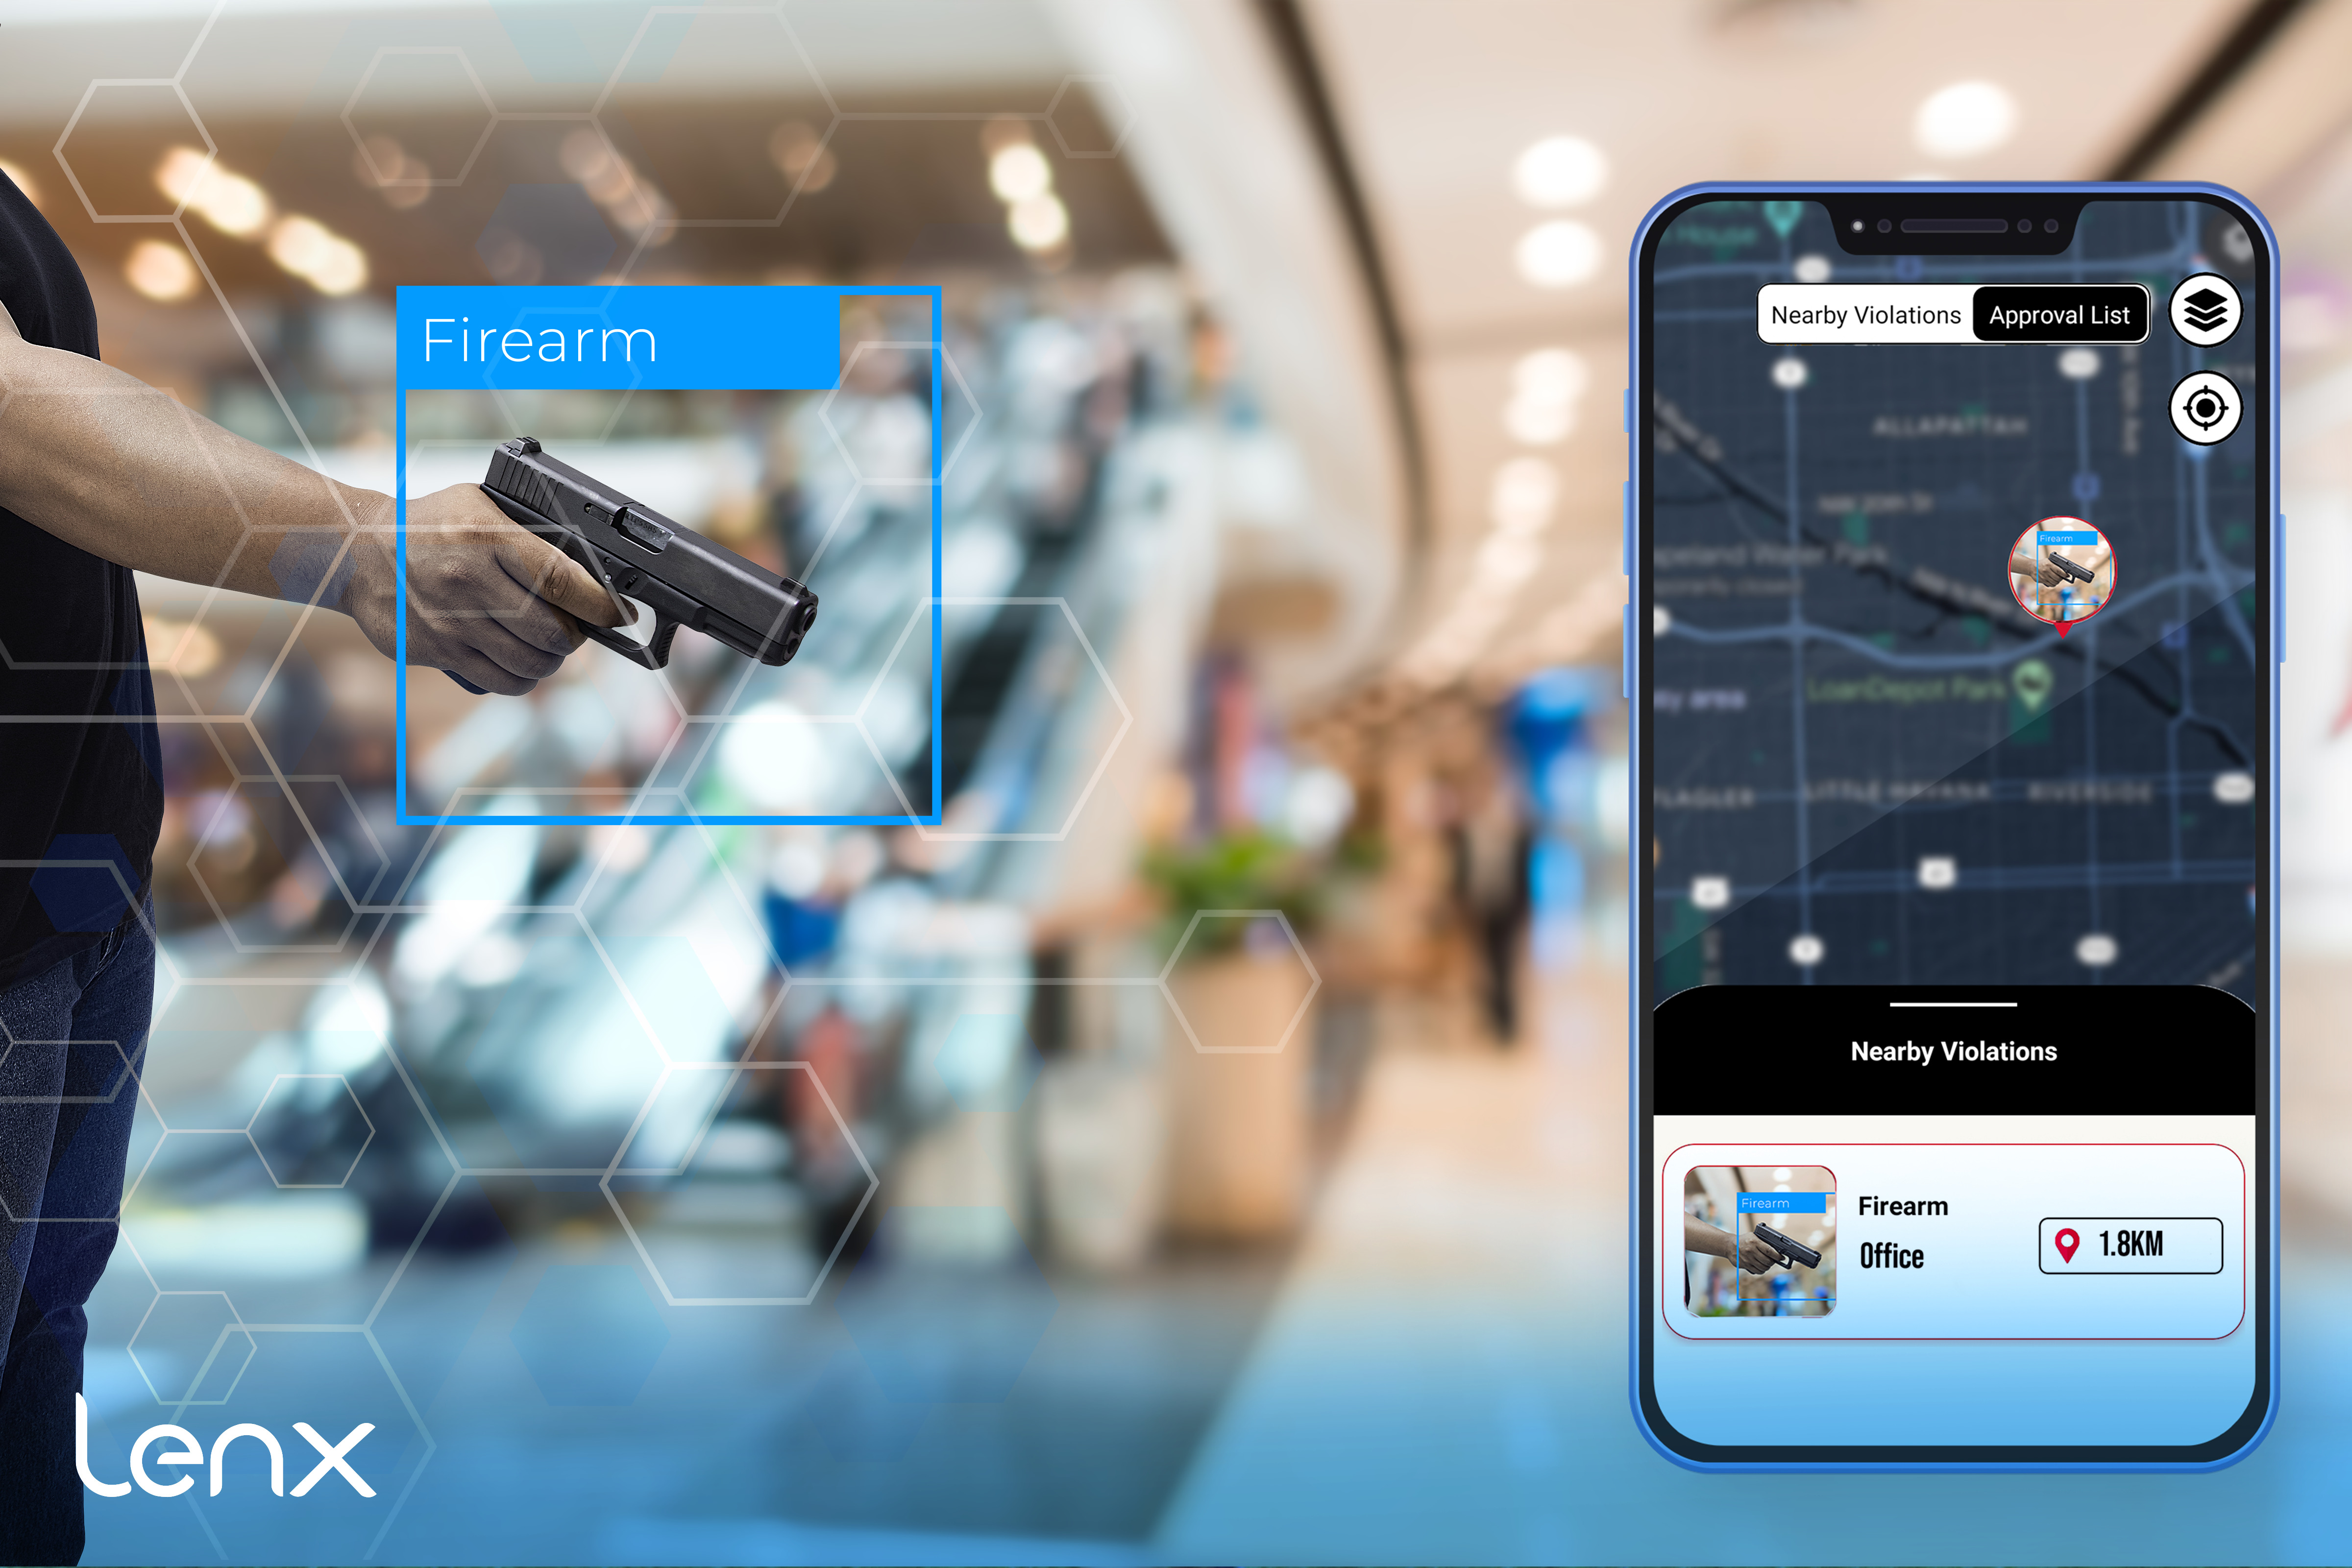 Tracking Weapons With AI Security And Gun Detection Systems